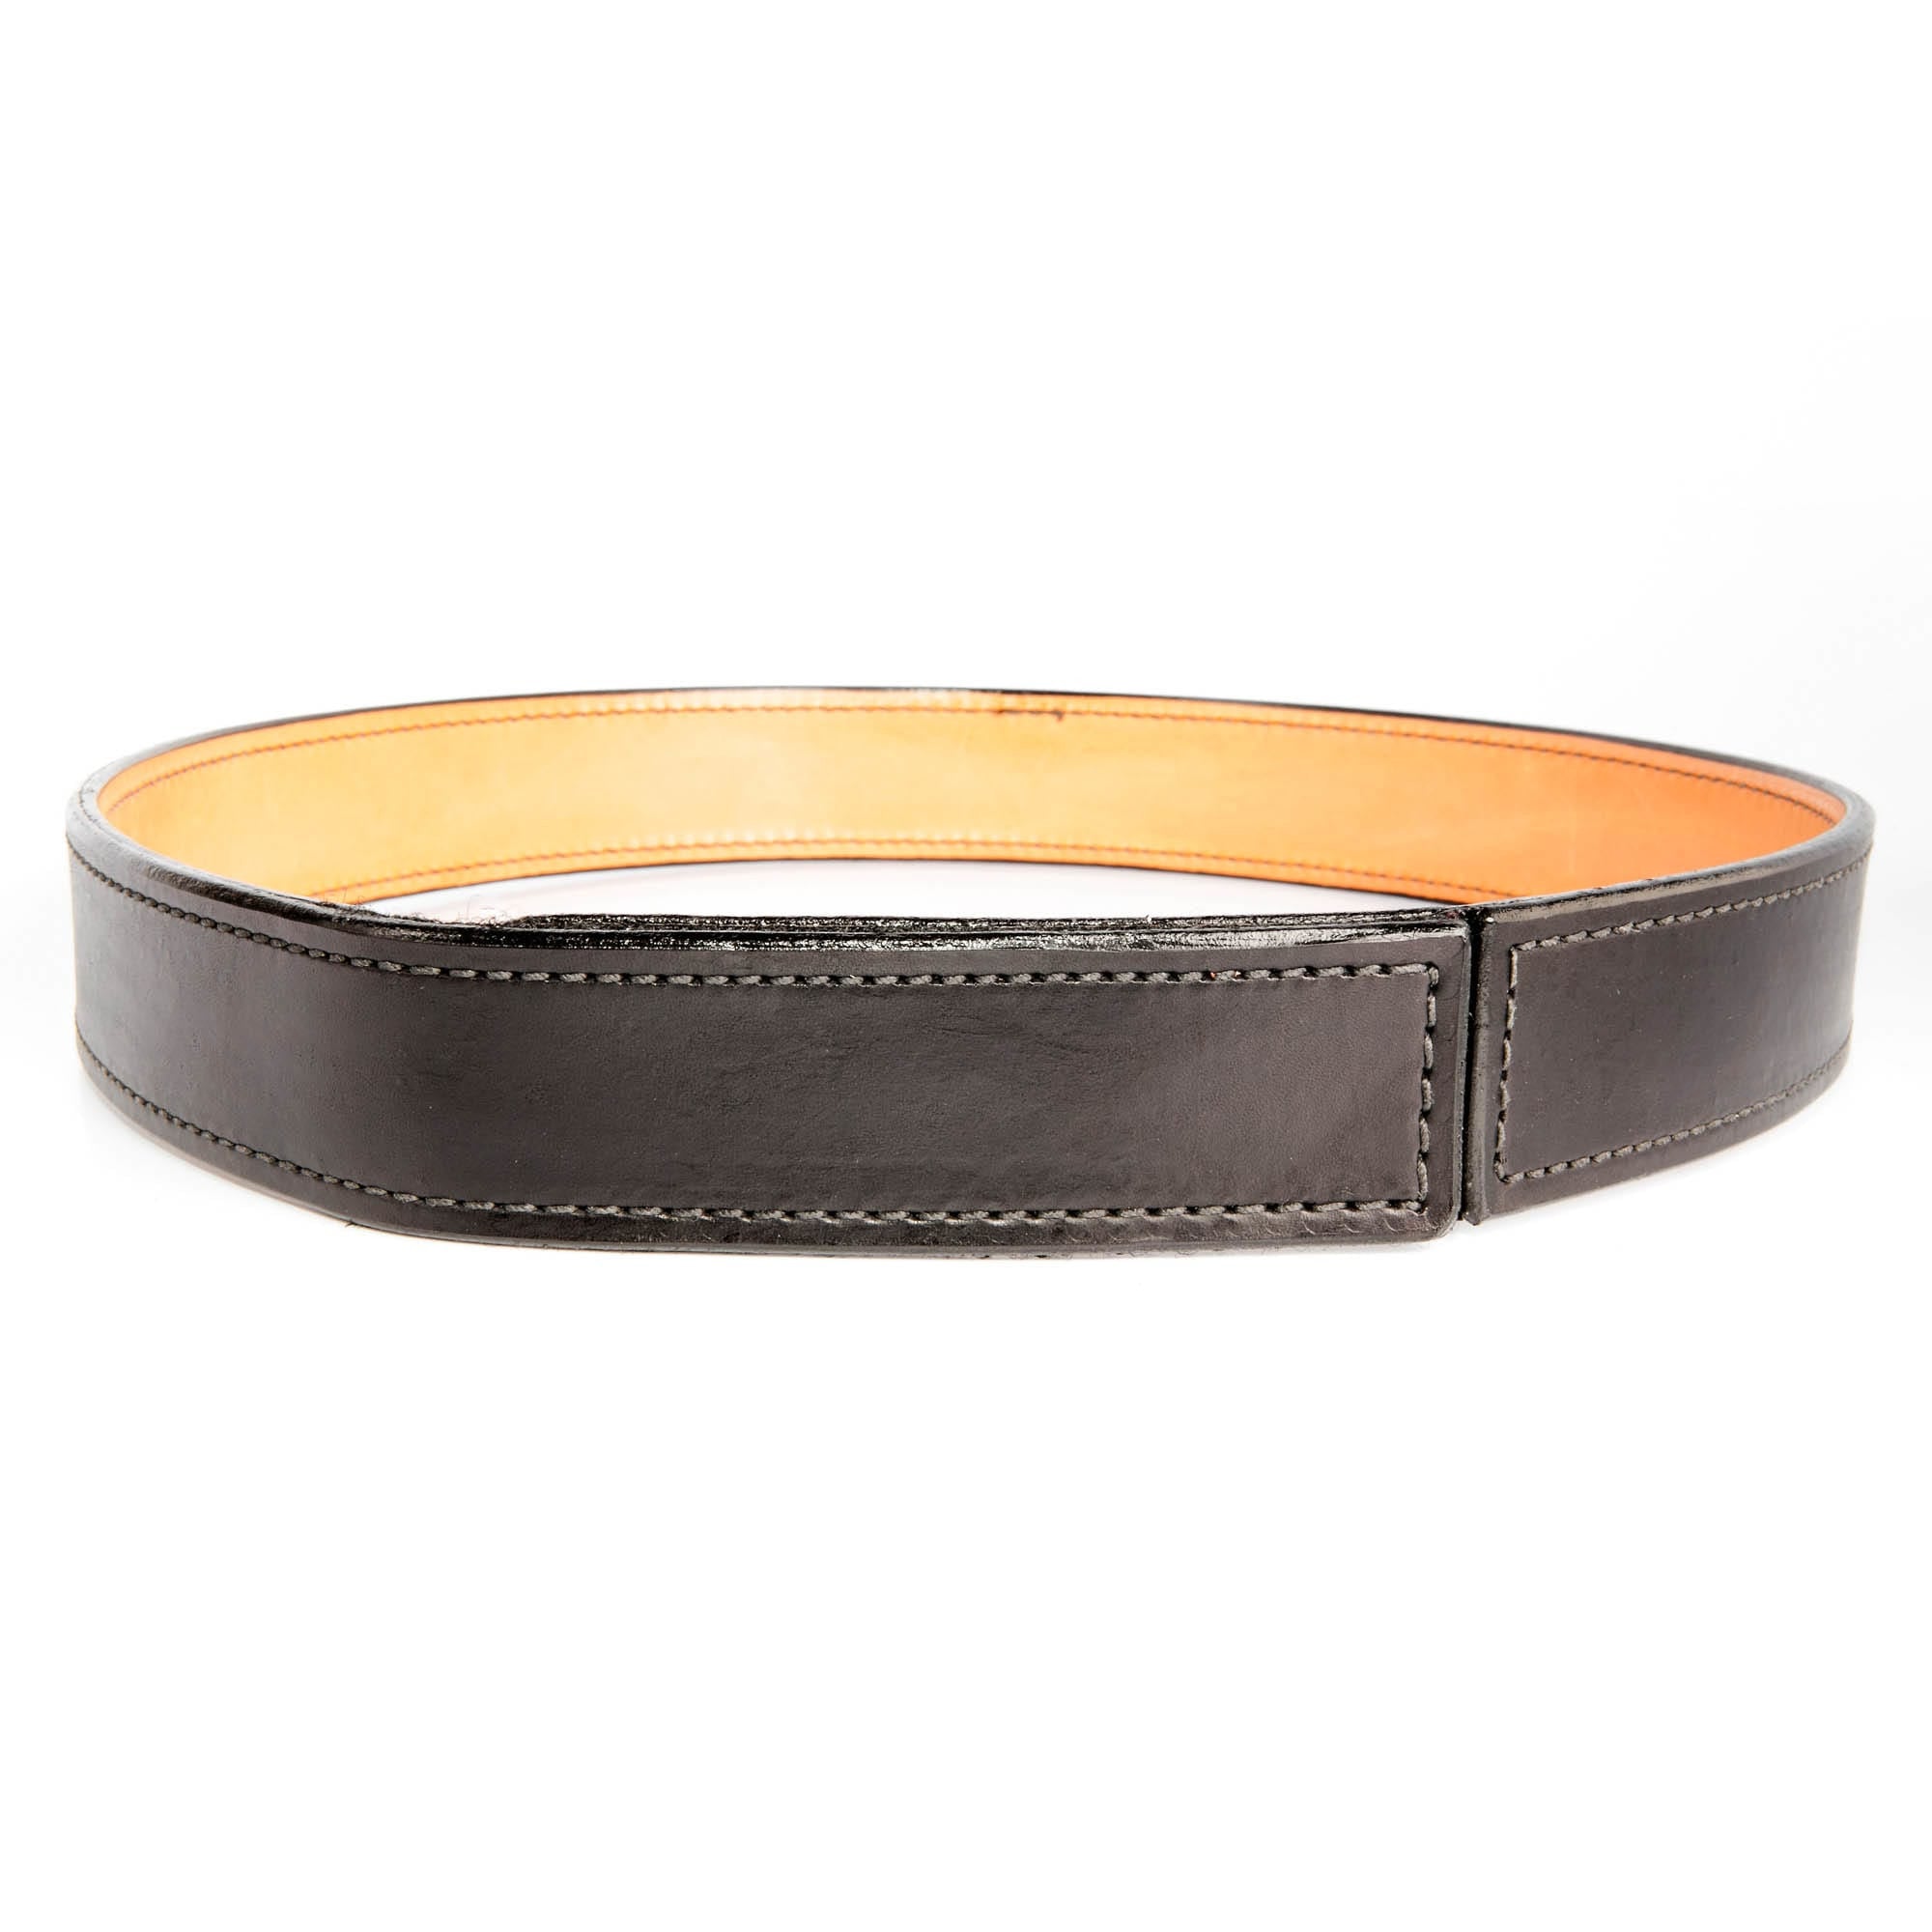 leather belt without buckle